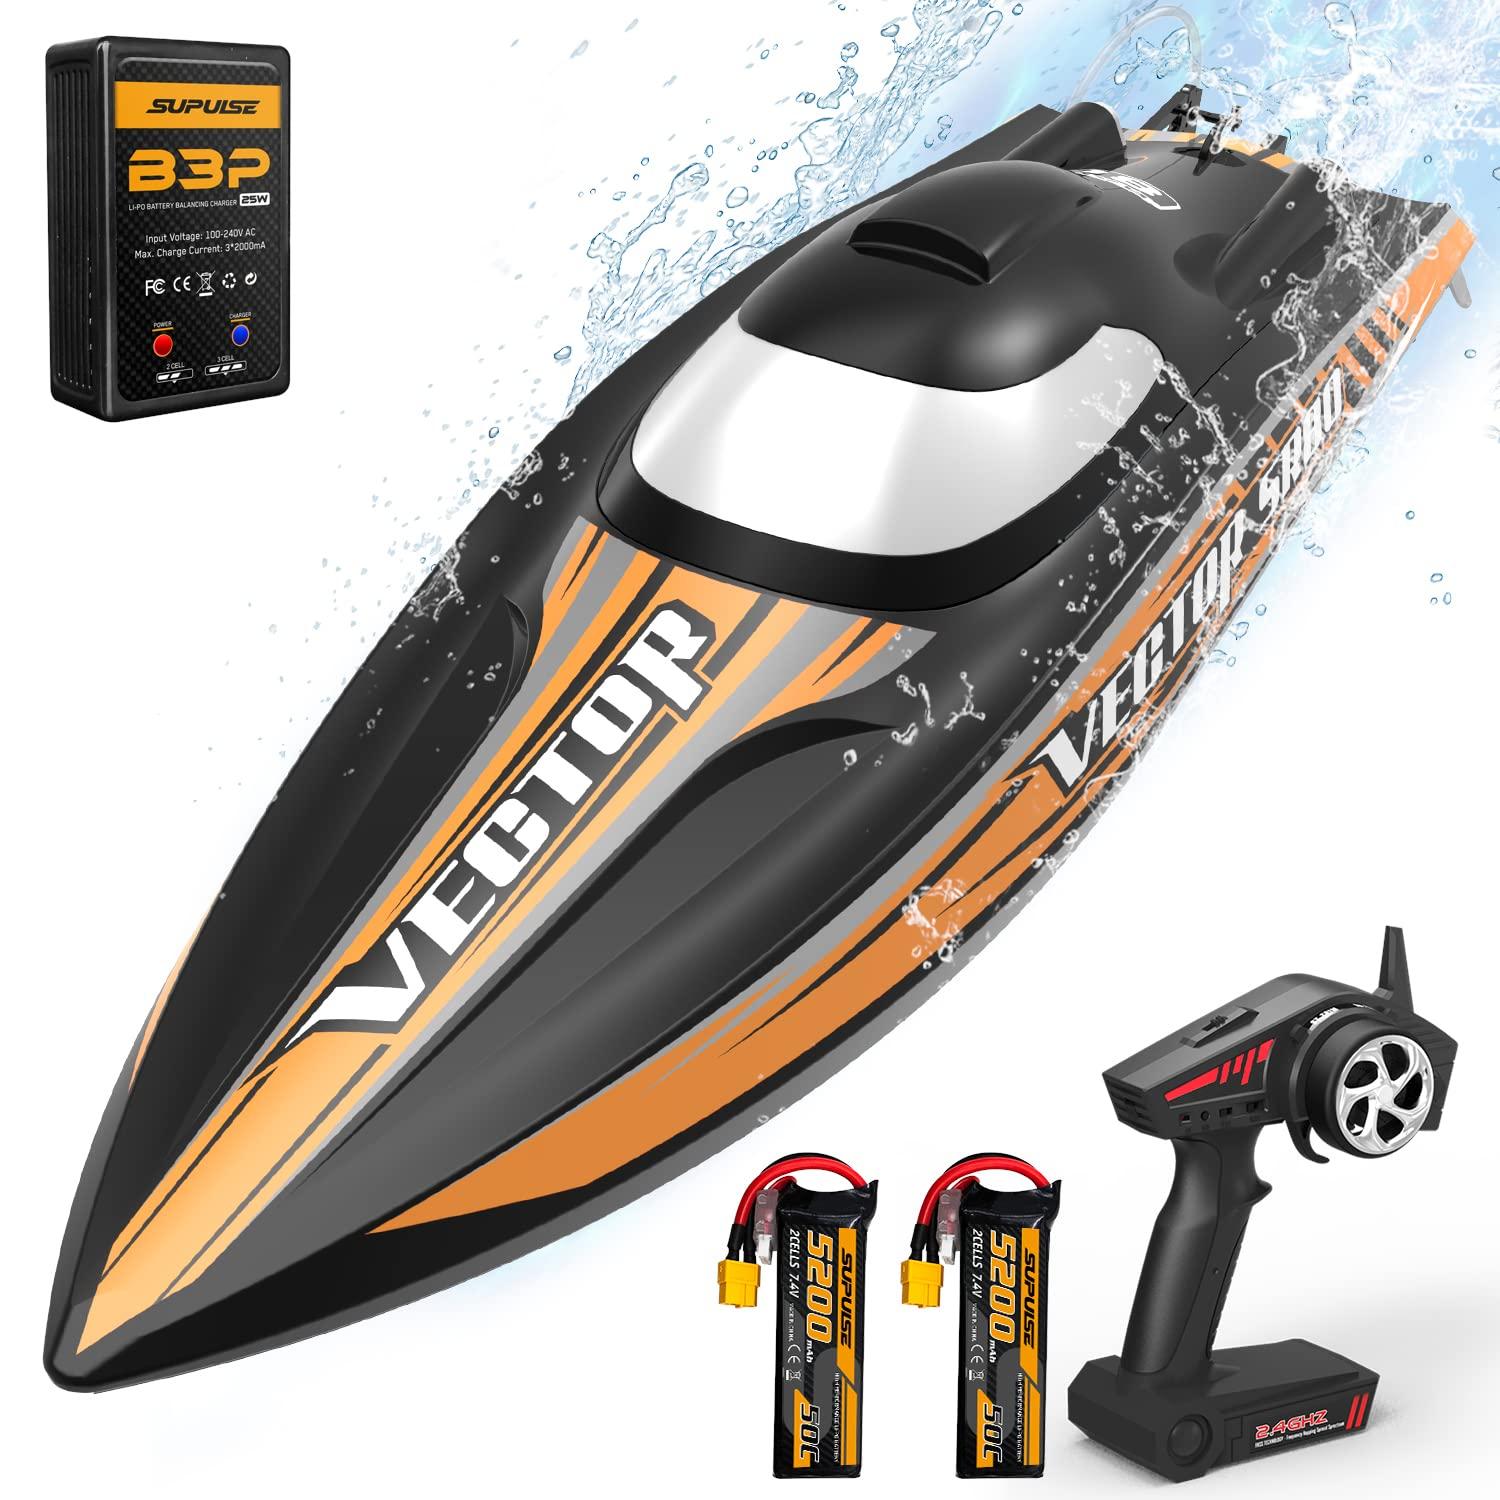 50 Mph Rc Boat: Key Features of 50 mph RC Boats